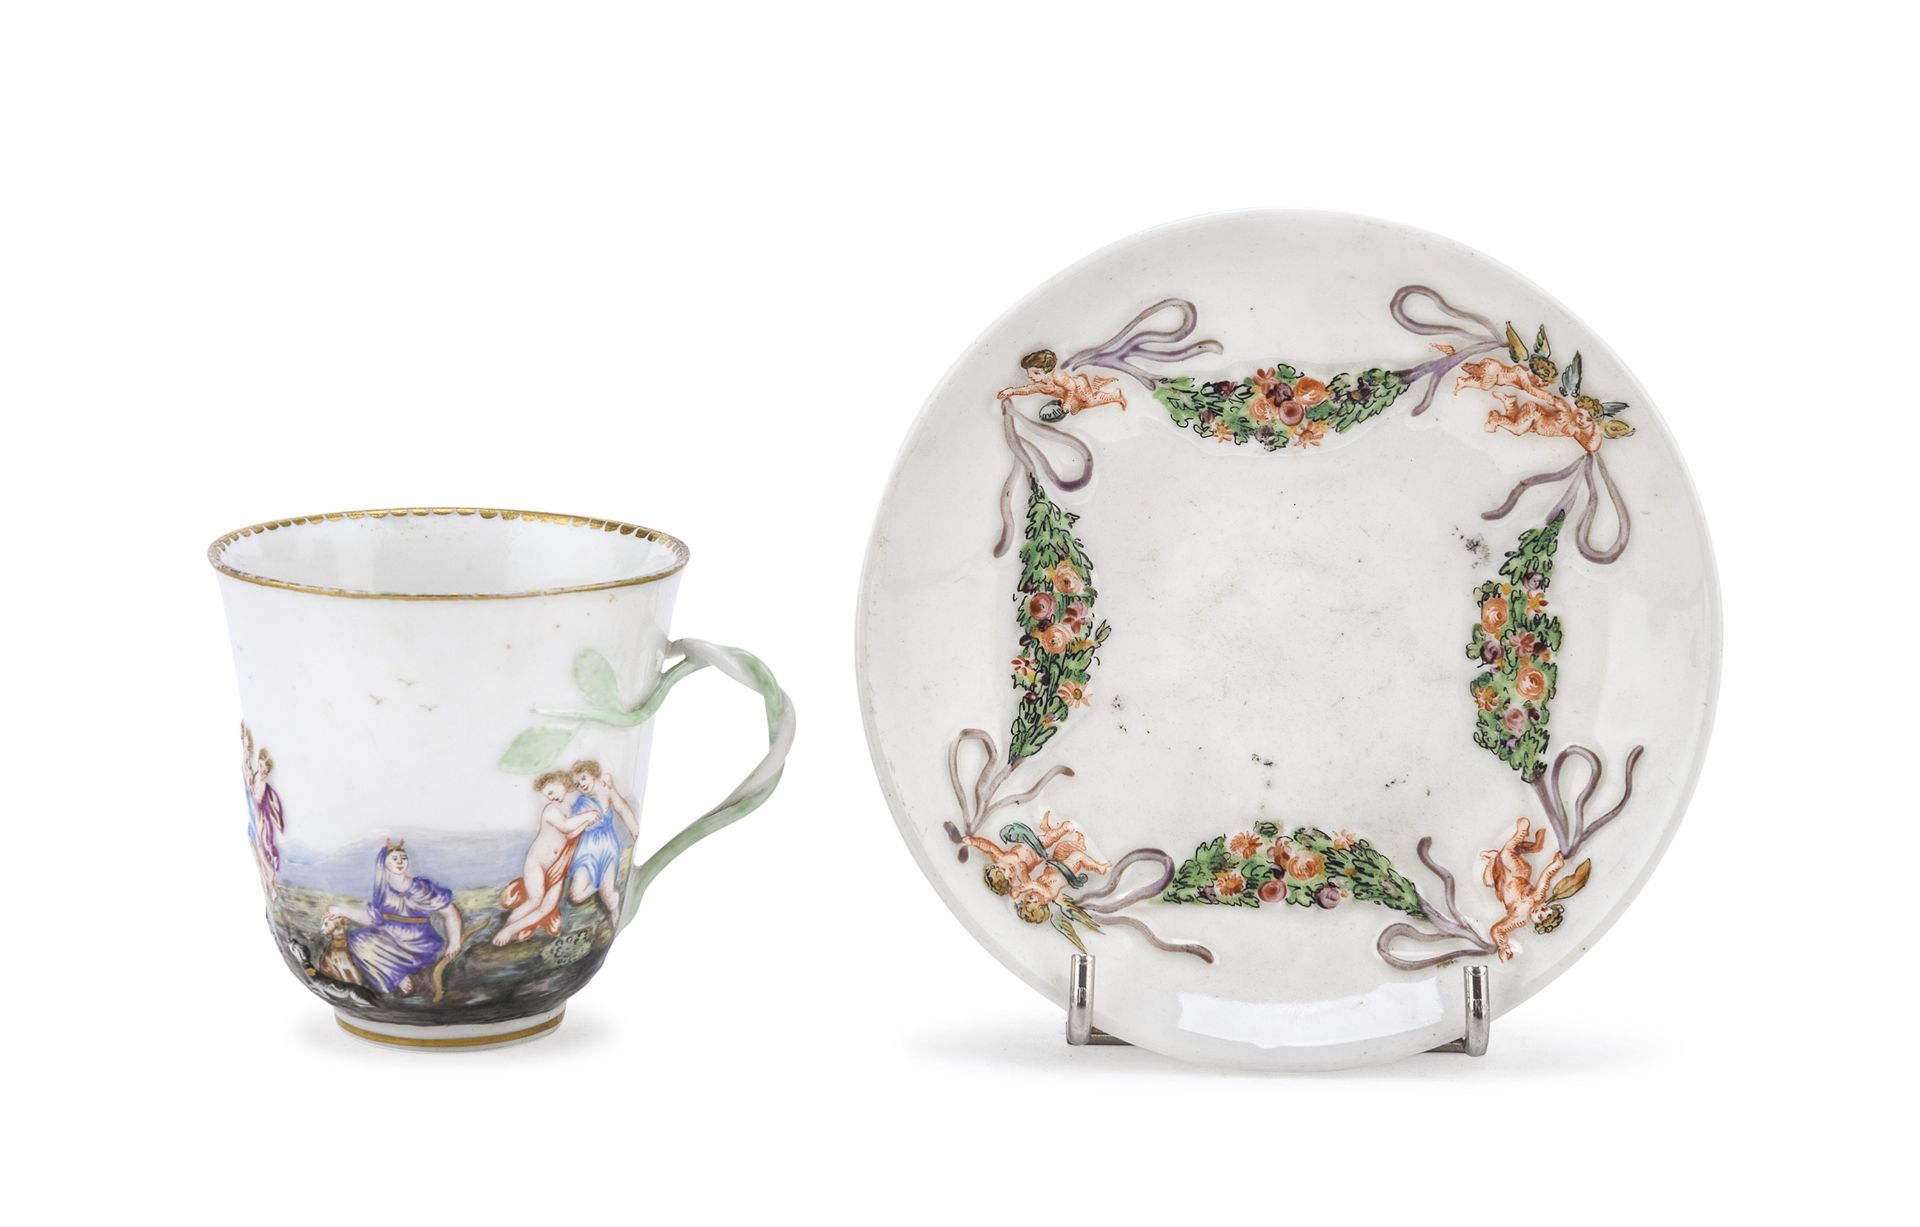 PORCELAIN CUP AND SAUCER GINORI END OF 19TH CENTURY